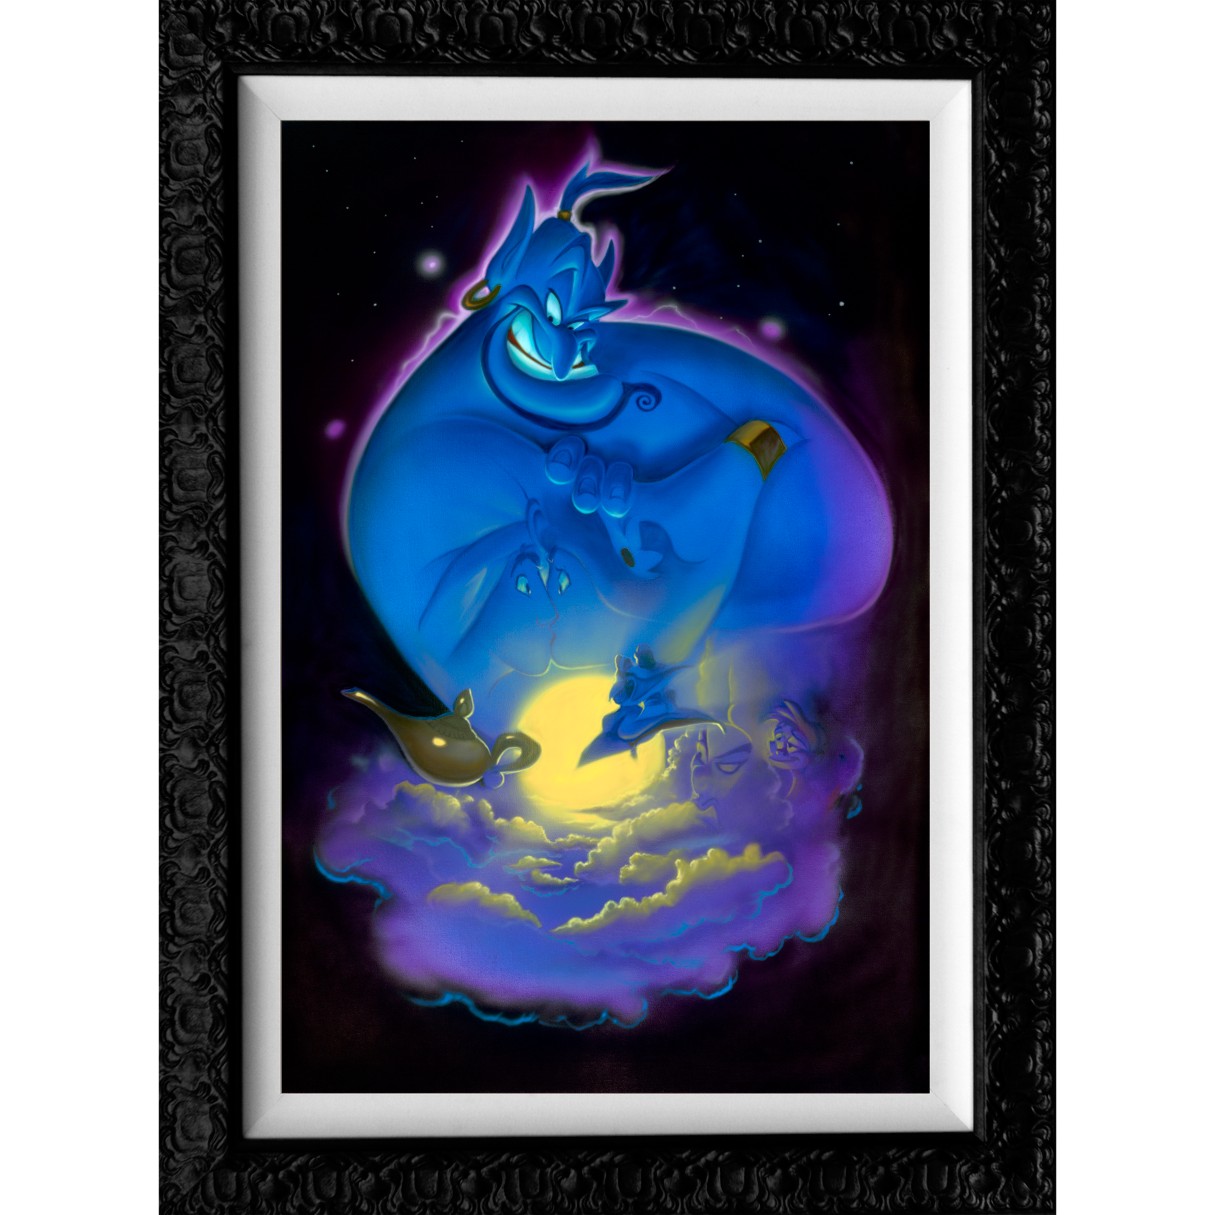 Aladdin ''Your Wish is My Command'' Limited Edition Giclée by Noah